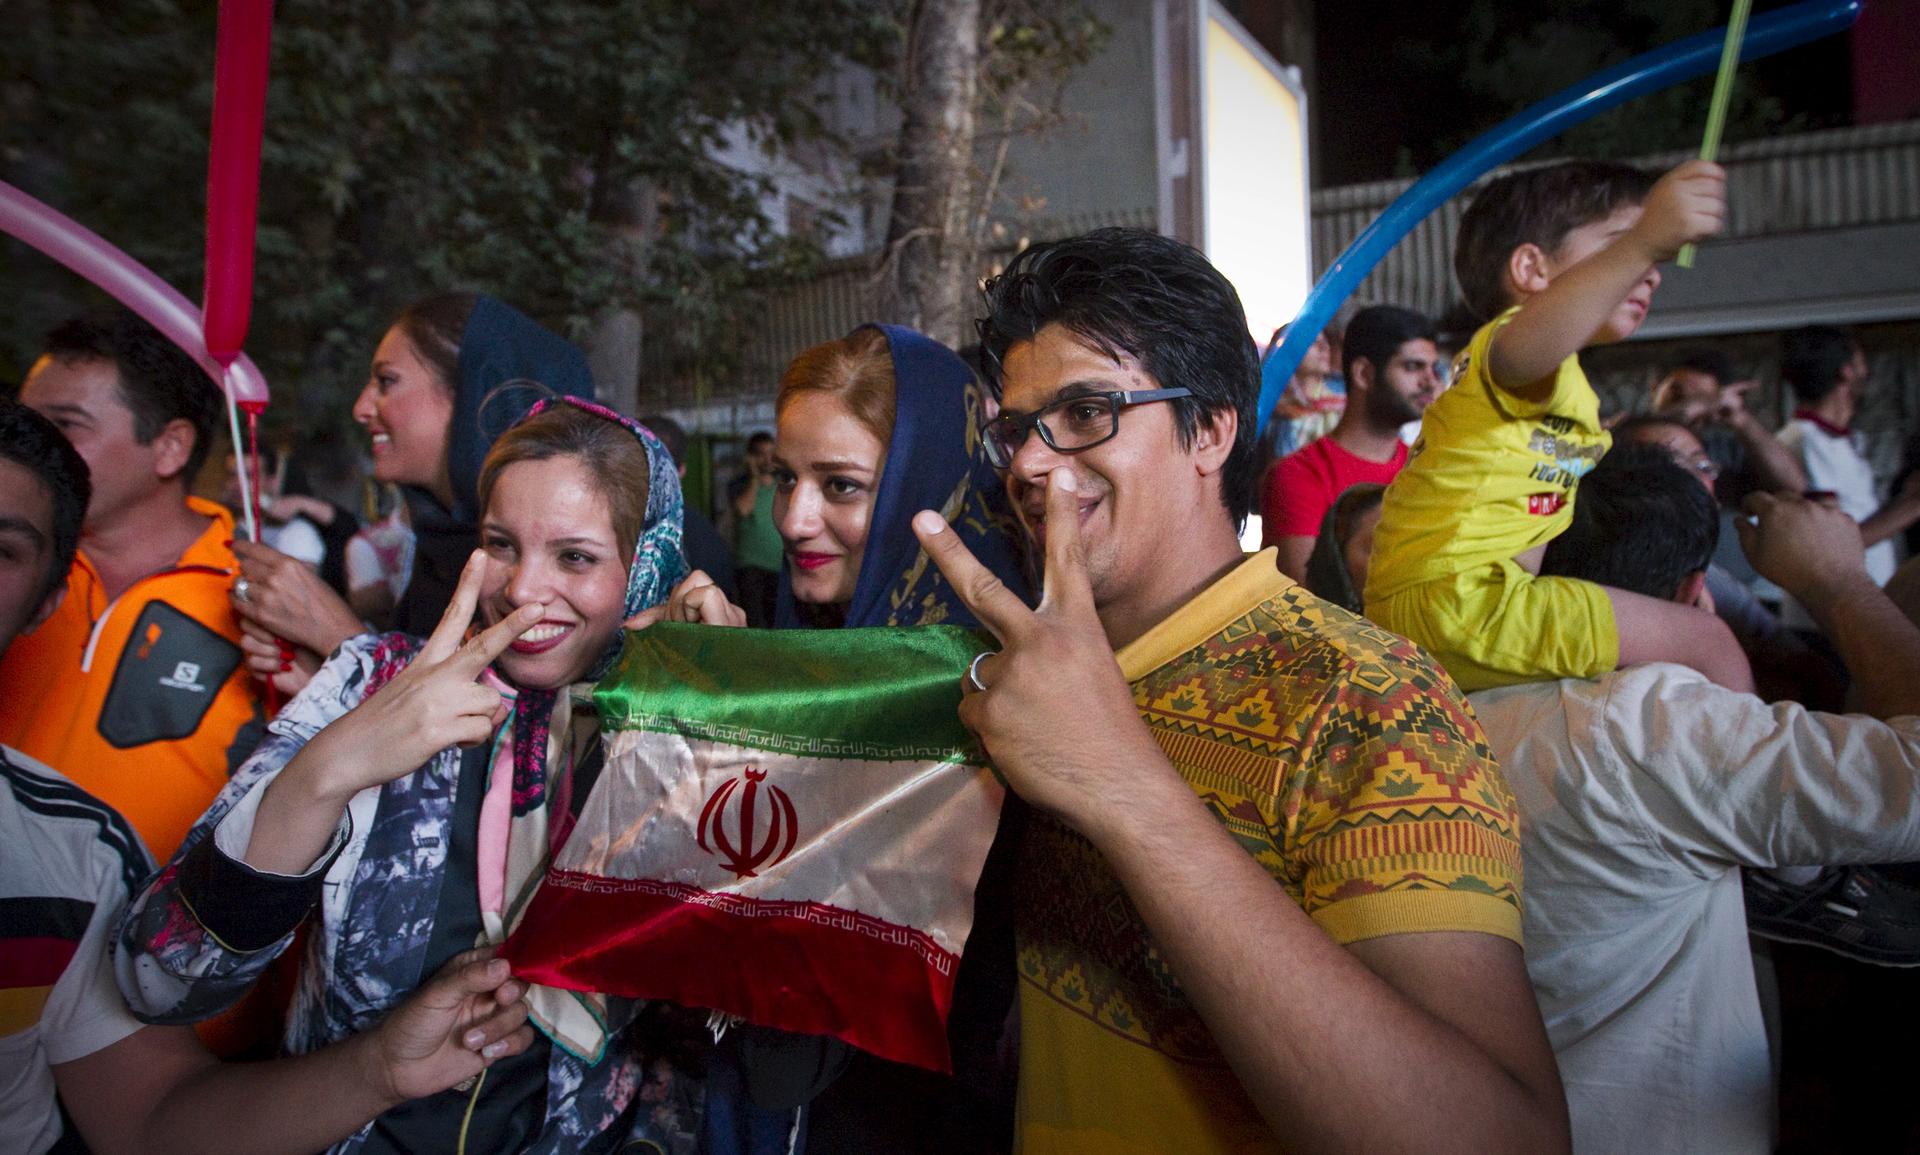 Iranians gesture as they celebrate in the streets of Tehran following the nuclear deal announced on July 14th. Iranian president Hassan Rouhani said a nuclear deal with major powers would open a new chapter of cooperation with the outside world after year